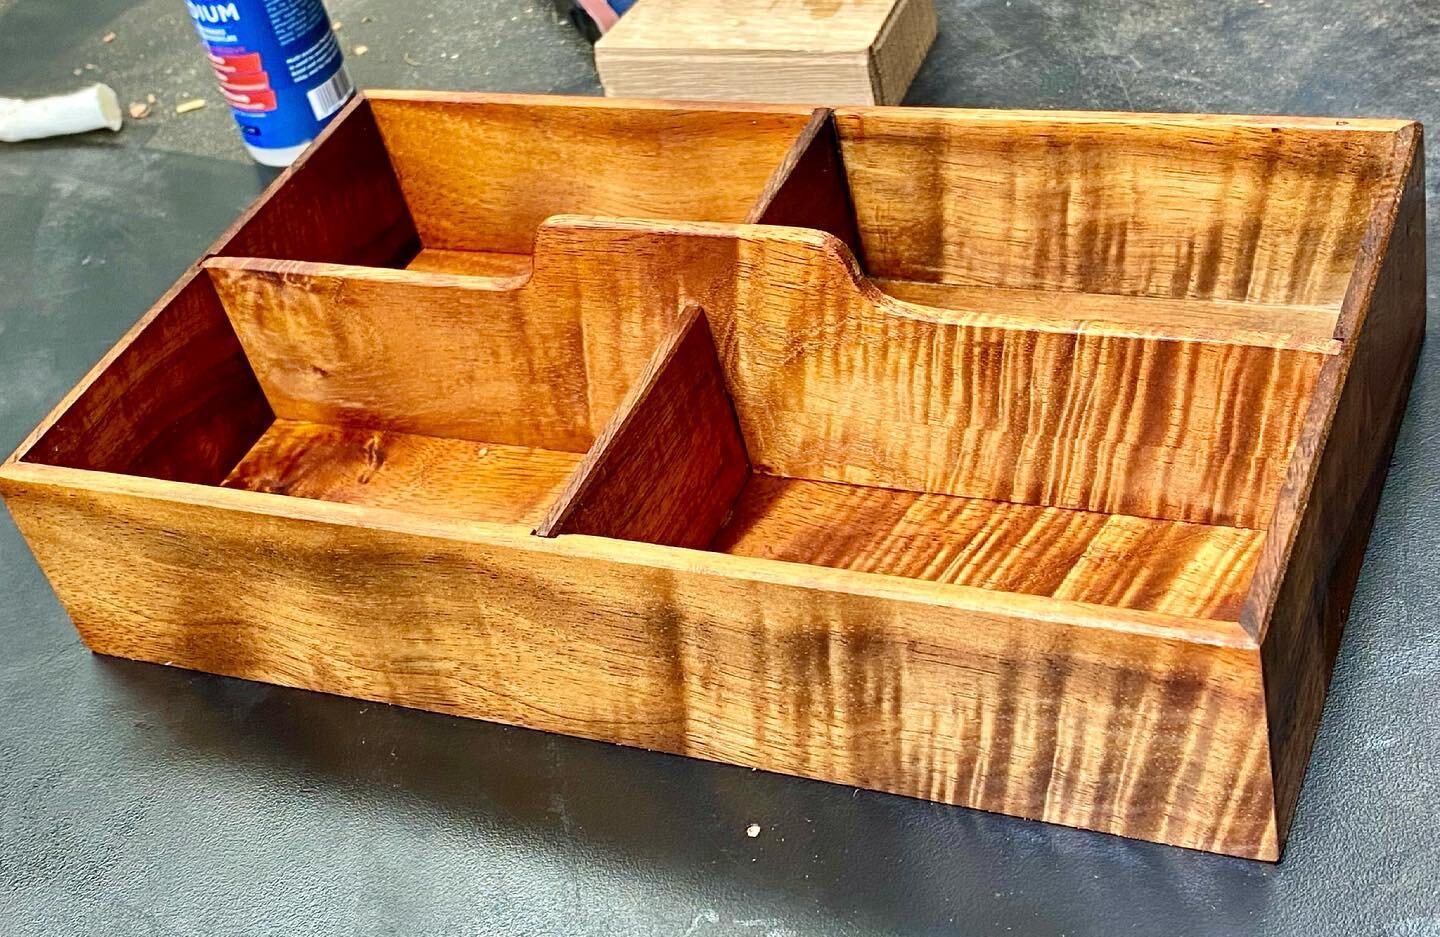 Sneak peek into the project that&rsquo;s in the finishing stage - this is a reclaimed Koa tray that will sit in a keepsake box made of Goncalo Alves (Tigerwood) sporting some brass bling.  I&rsquo;ve been filming the process and will be posting a vid